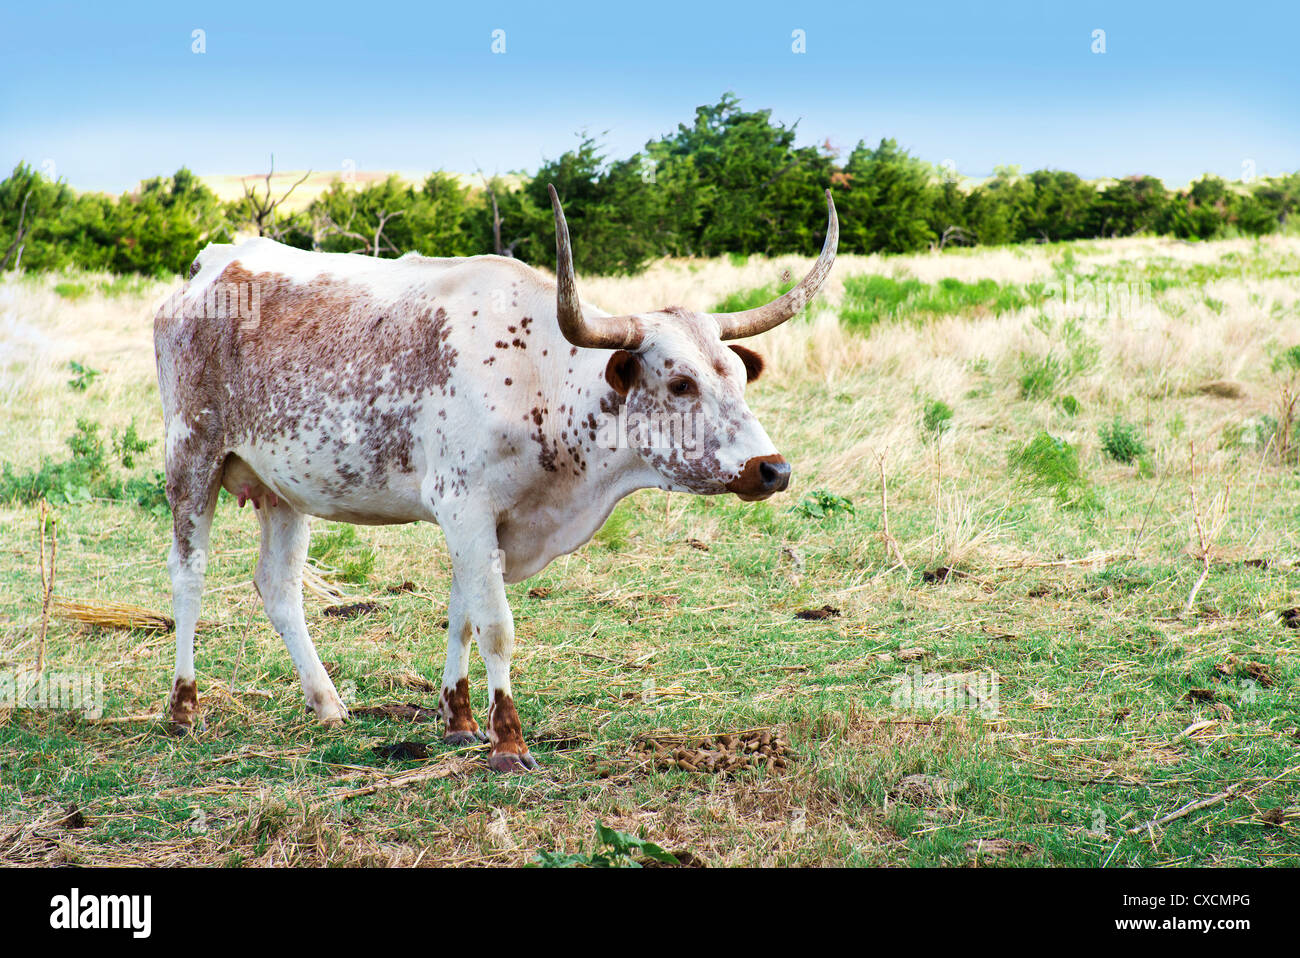 A Texas Longhorn, Bos bos, in a pasture eating pellets in western Oklahoma, USA. Stock Photo